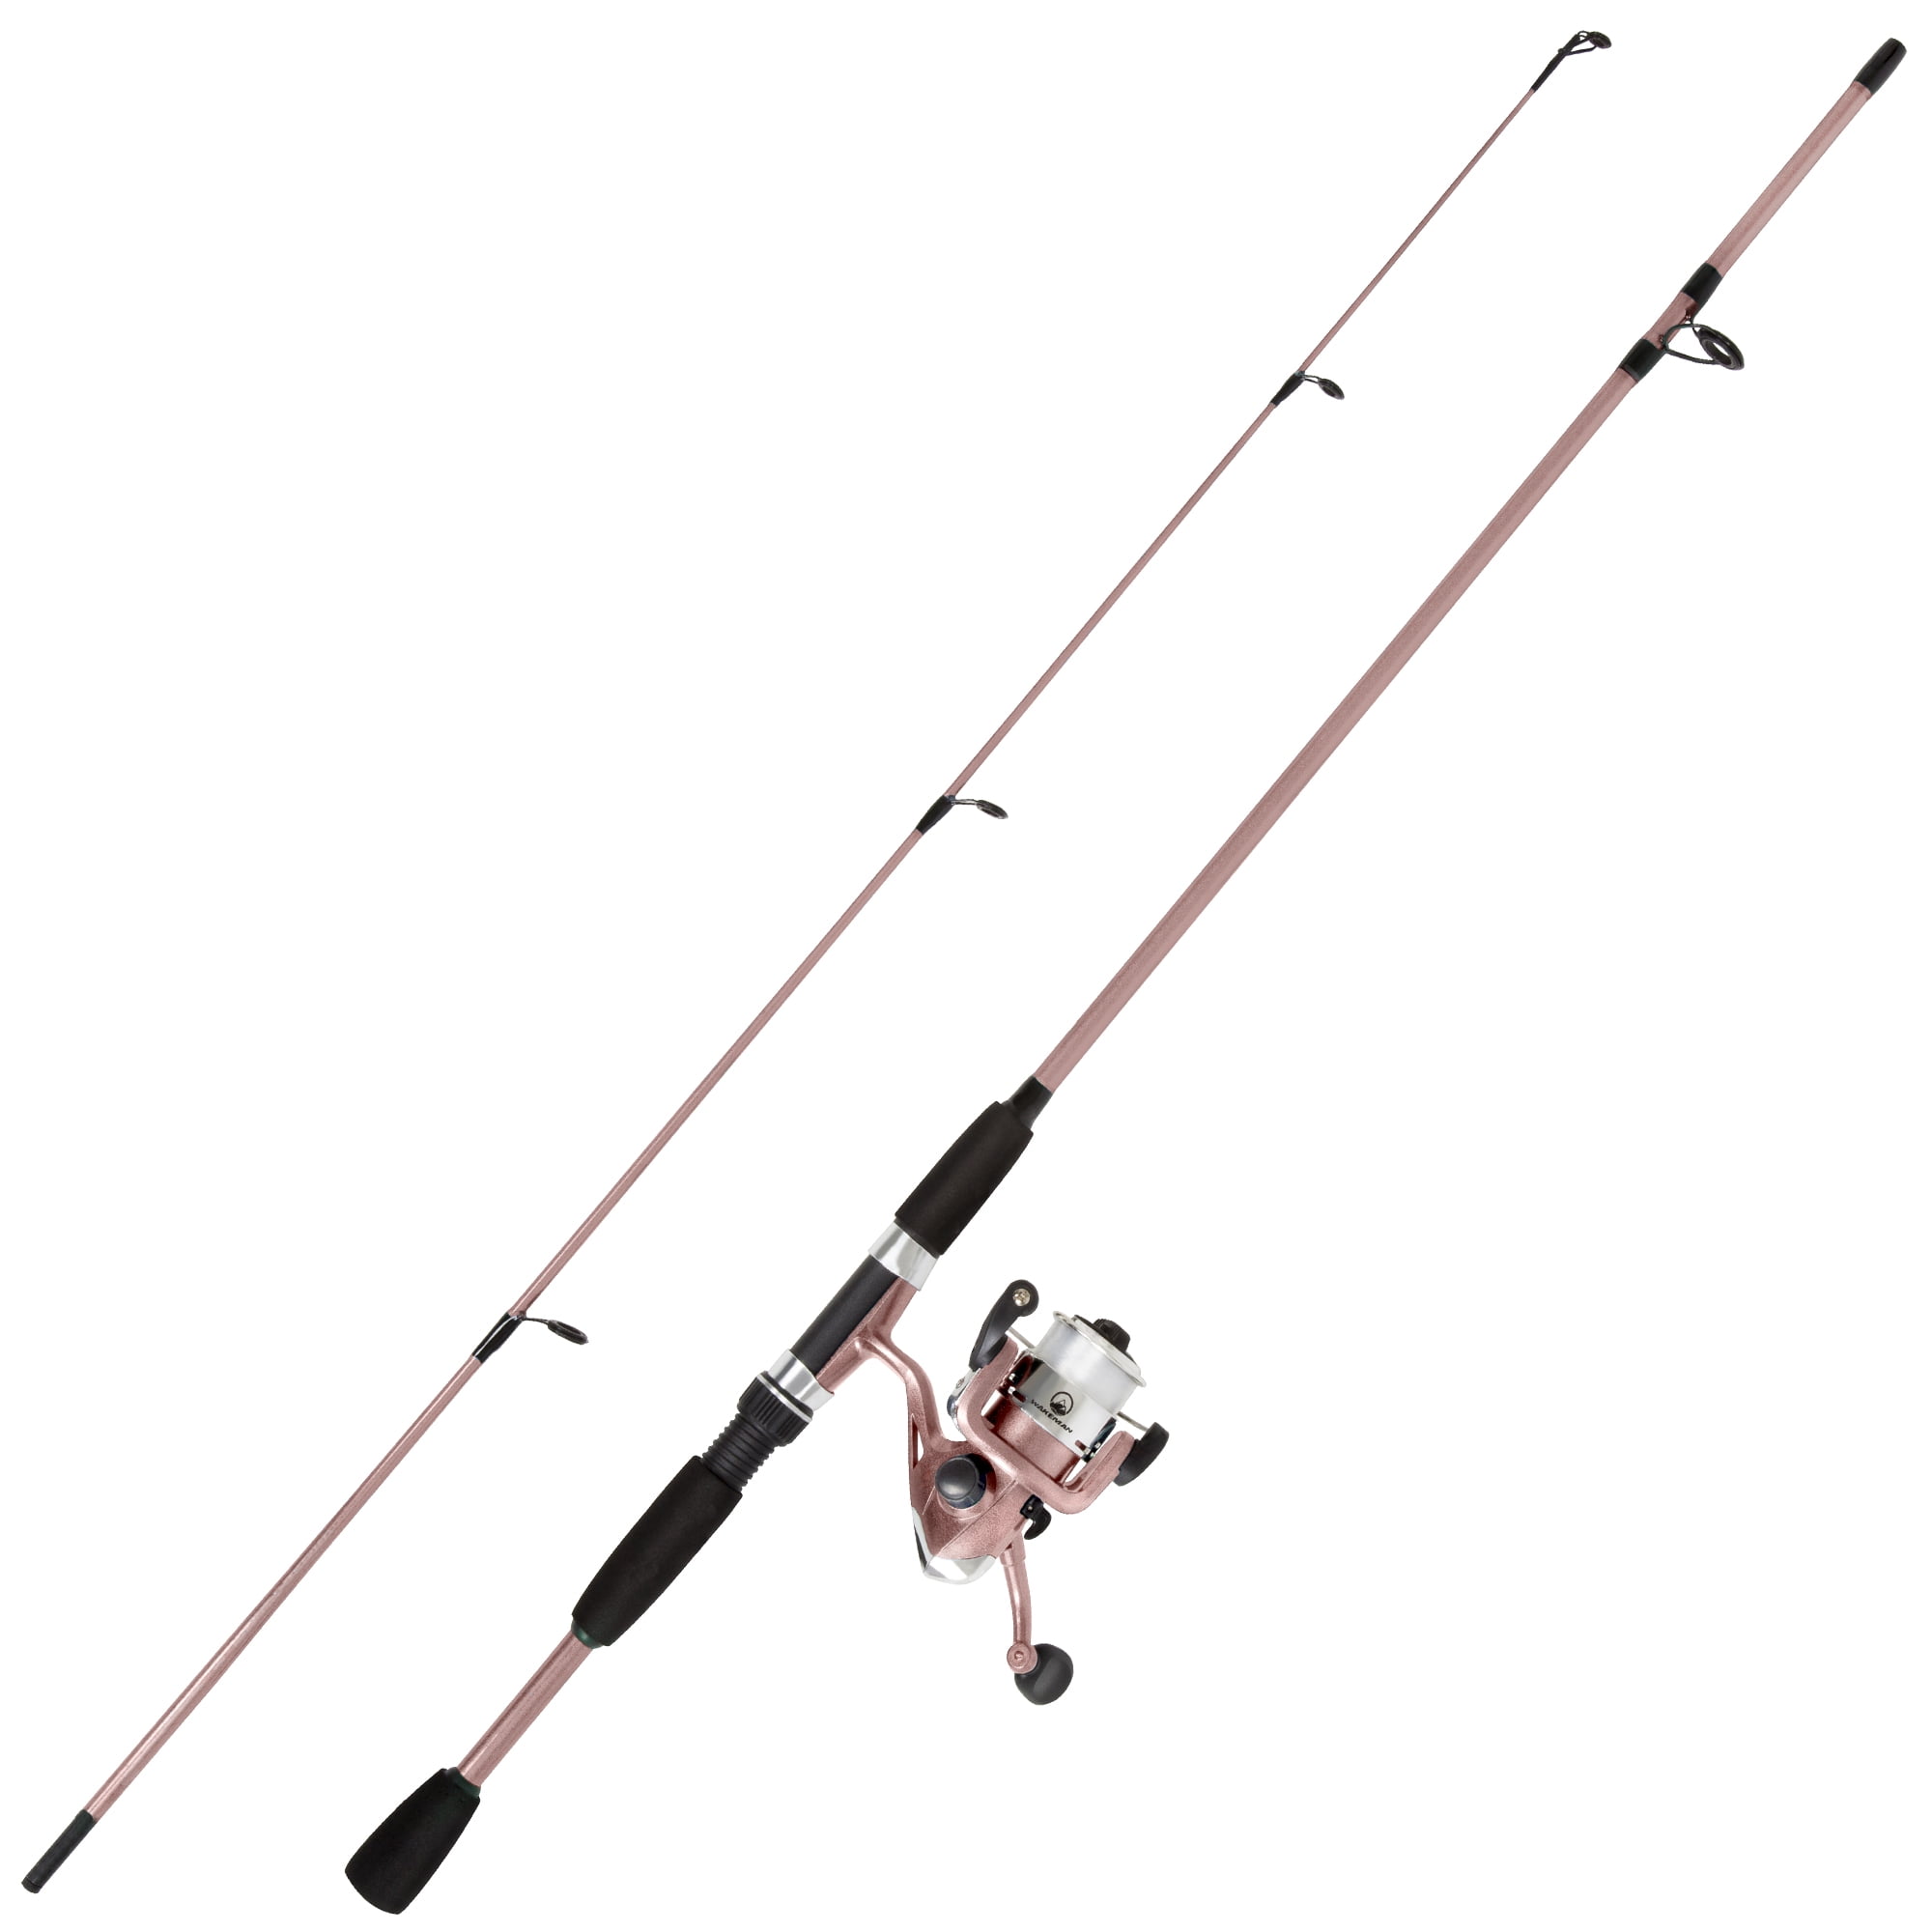 Fishing Rod and Reel Combo, Spinning Reel, Fishing Gear for Bass and Trout  Fishing, Great for Kids, Black - Swarm Series by Wakeman 